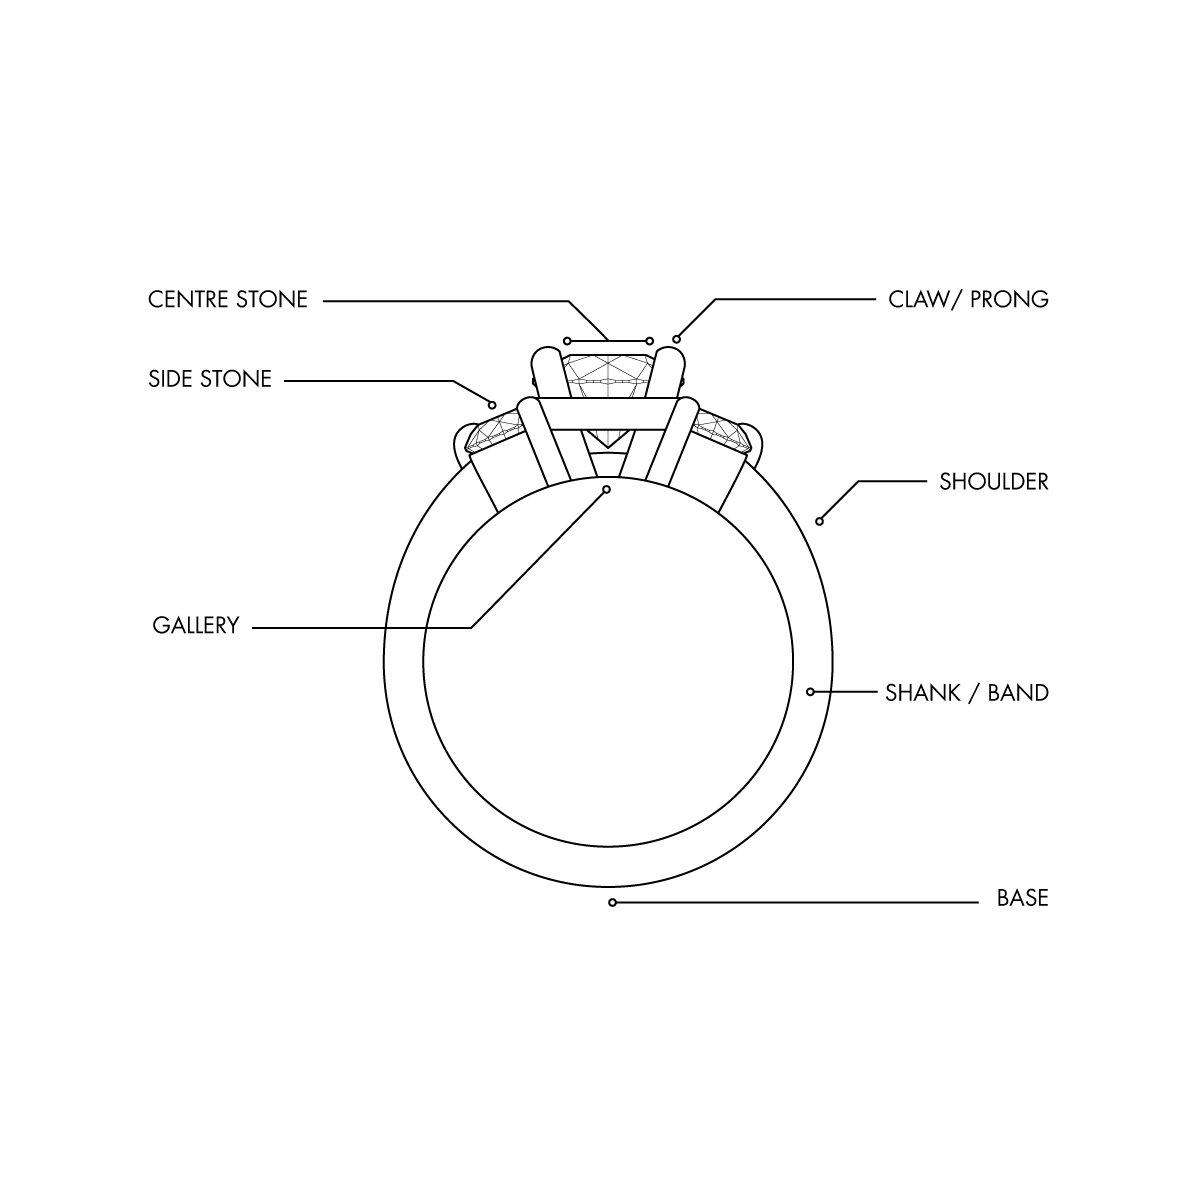 The anatomy of a Ring